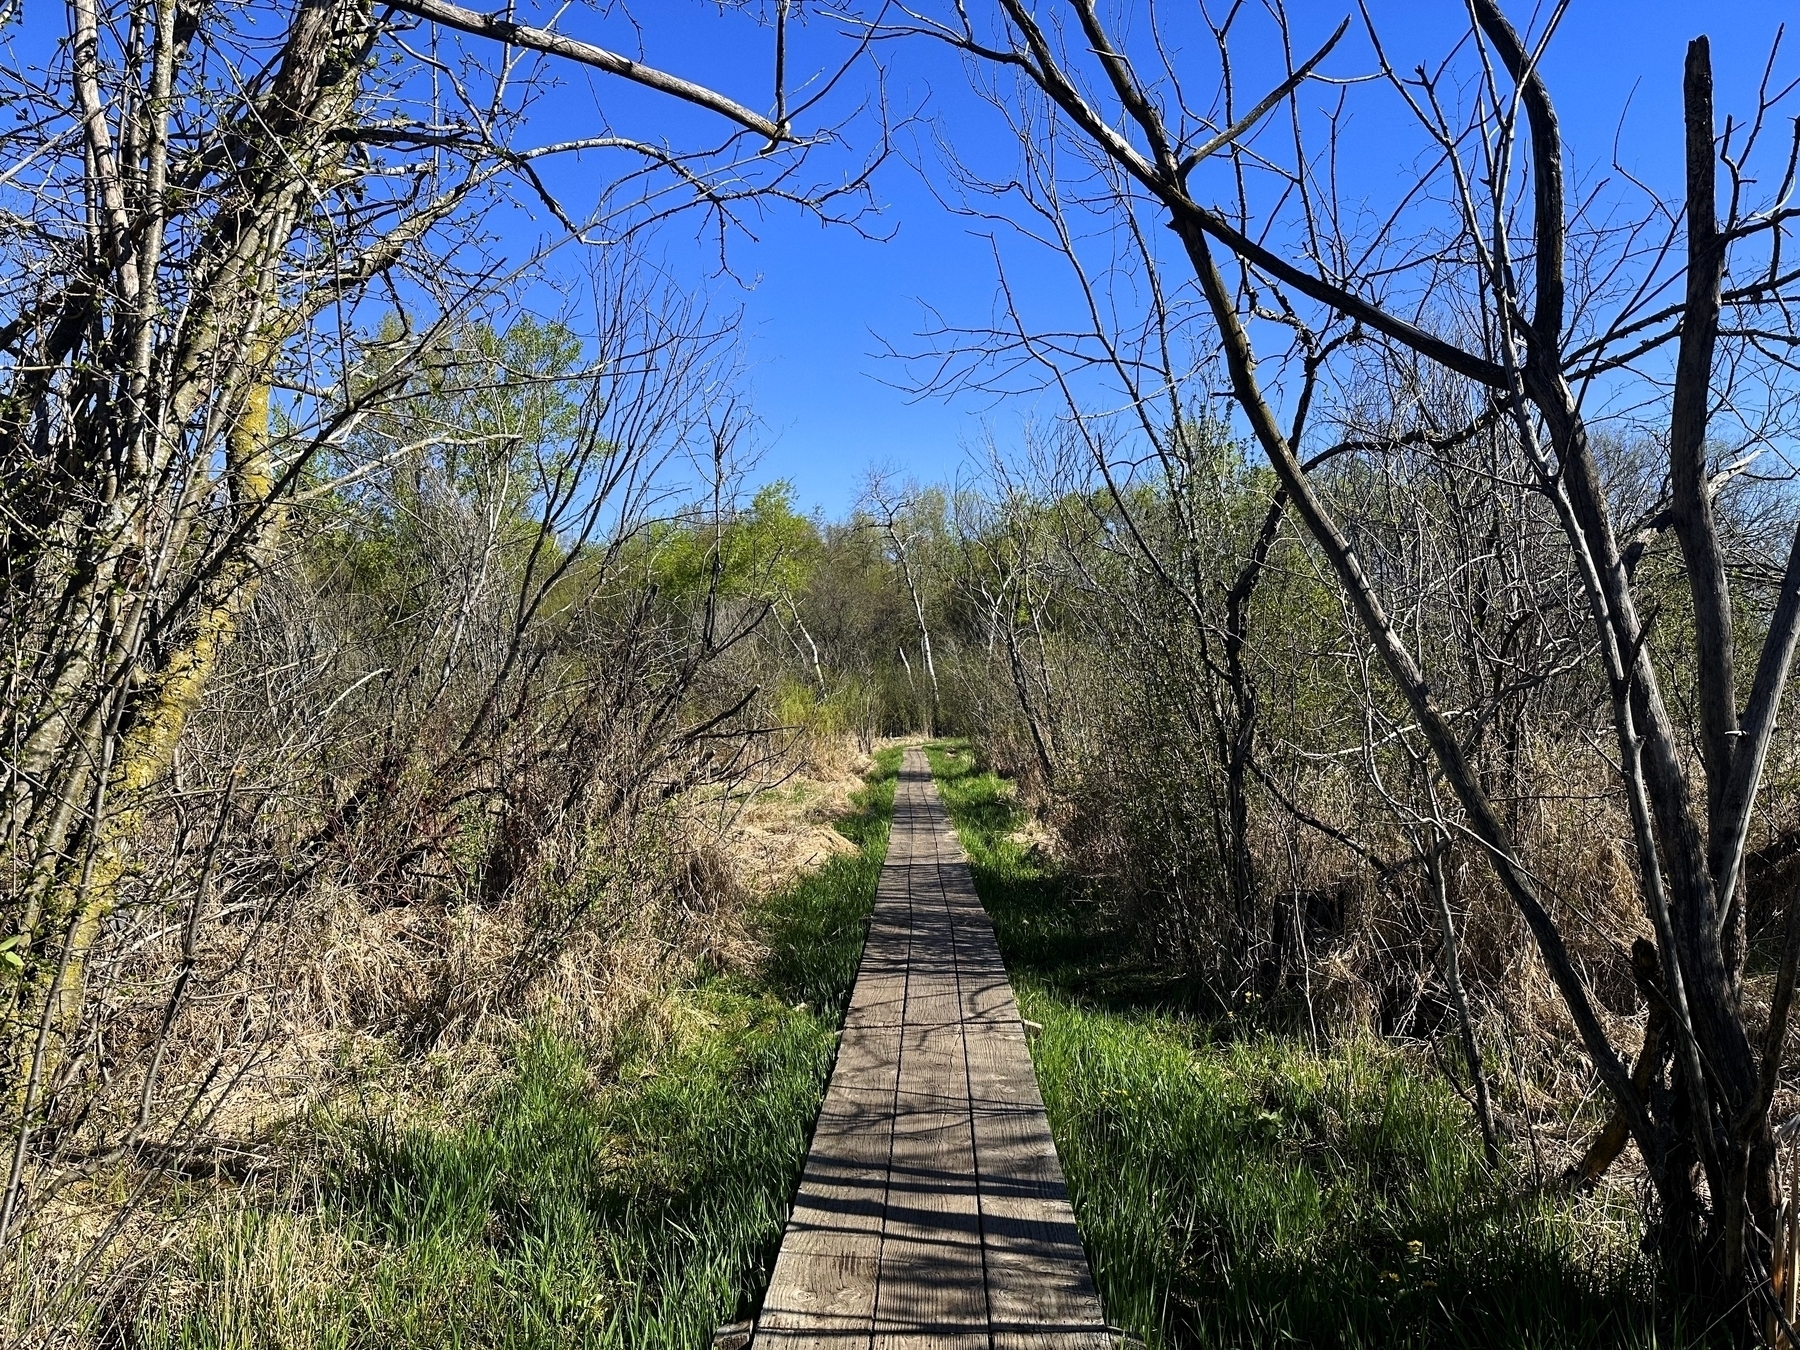 A wooden boardwalk meandering through a nature area with leafless trees and green shrubs under a clear blue sky.